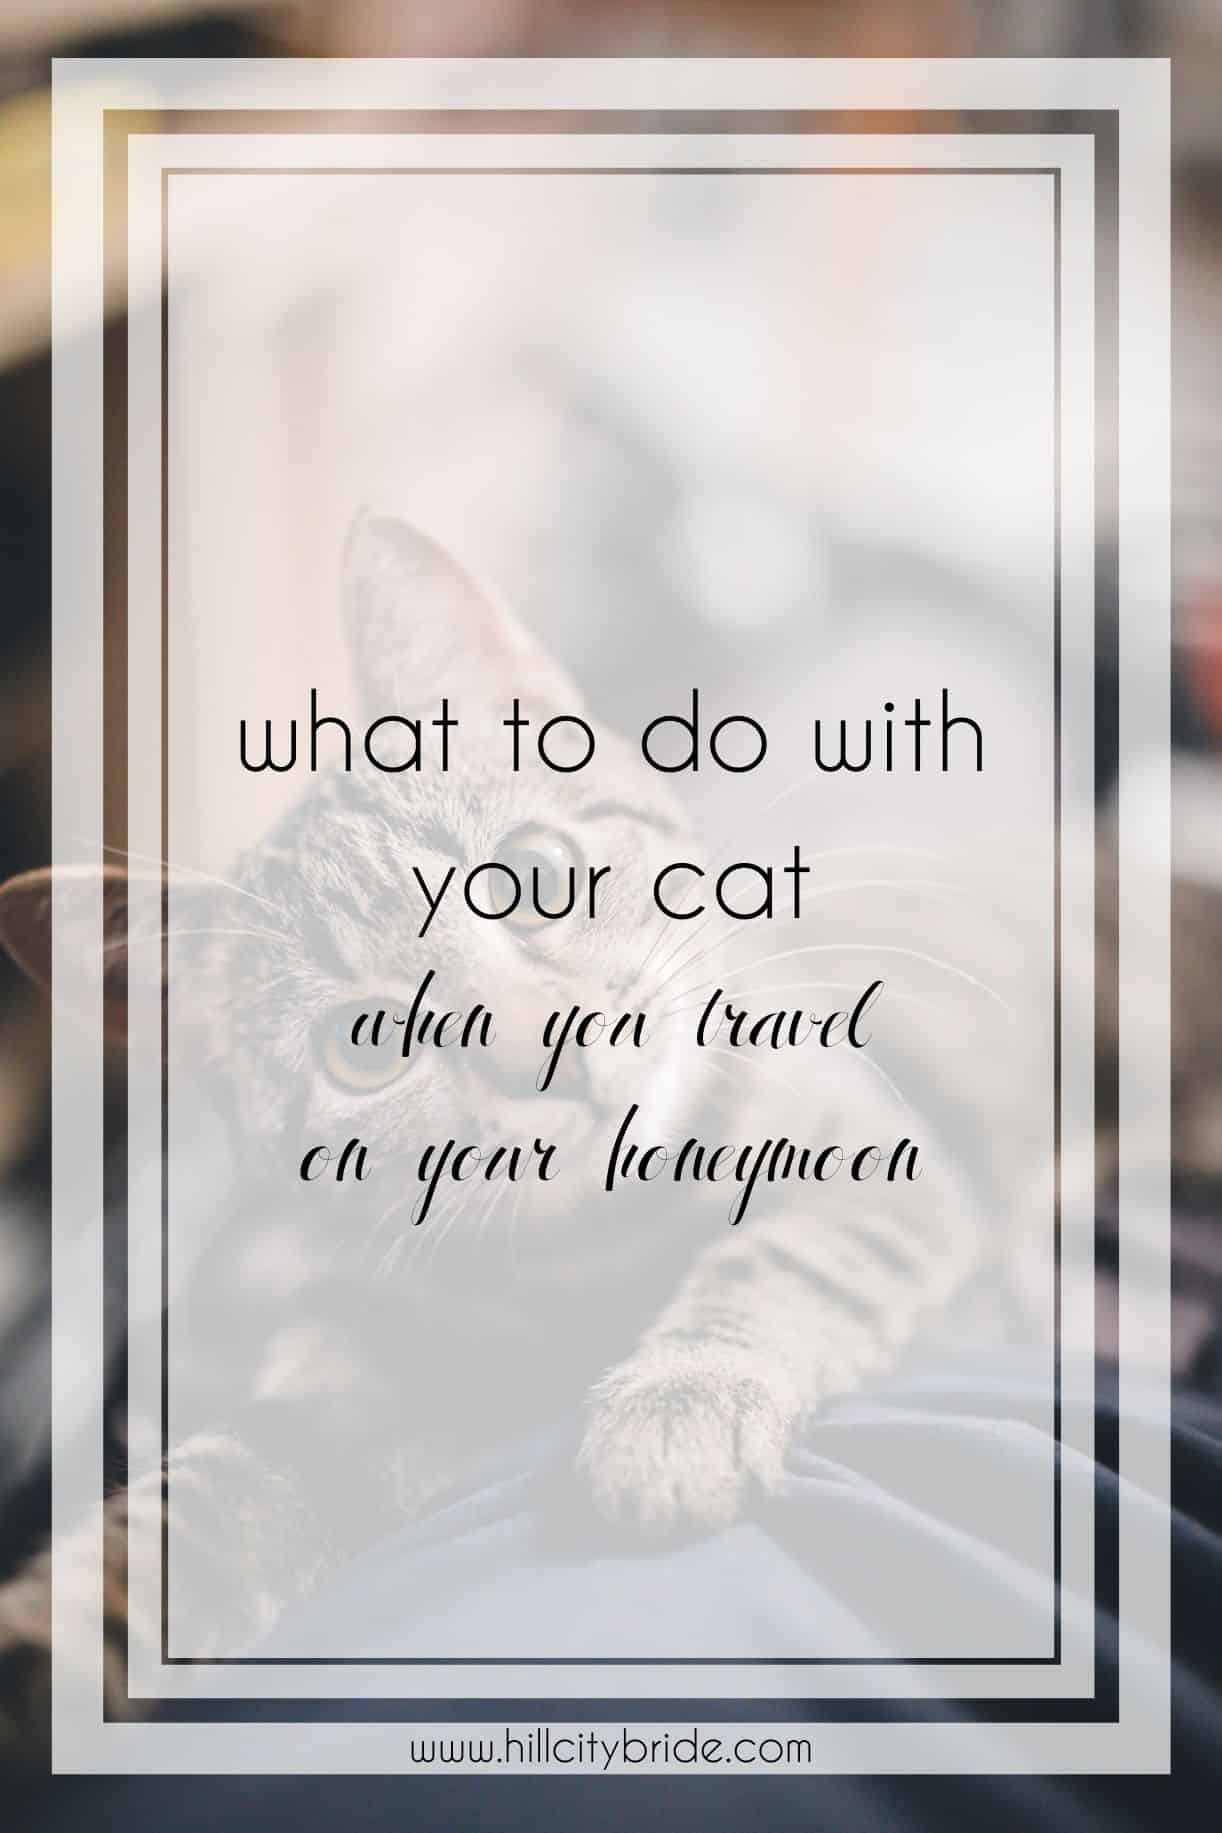 https://hillcitybride.com/wp-content/uploads/2021/01/27-40876-post/10-Fabulous-Tips-on-What-to-Do-With-Your-Cat-When-You-Travel.jpg